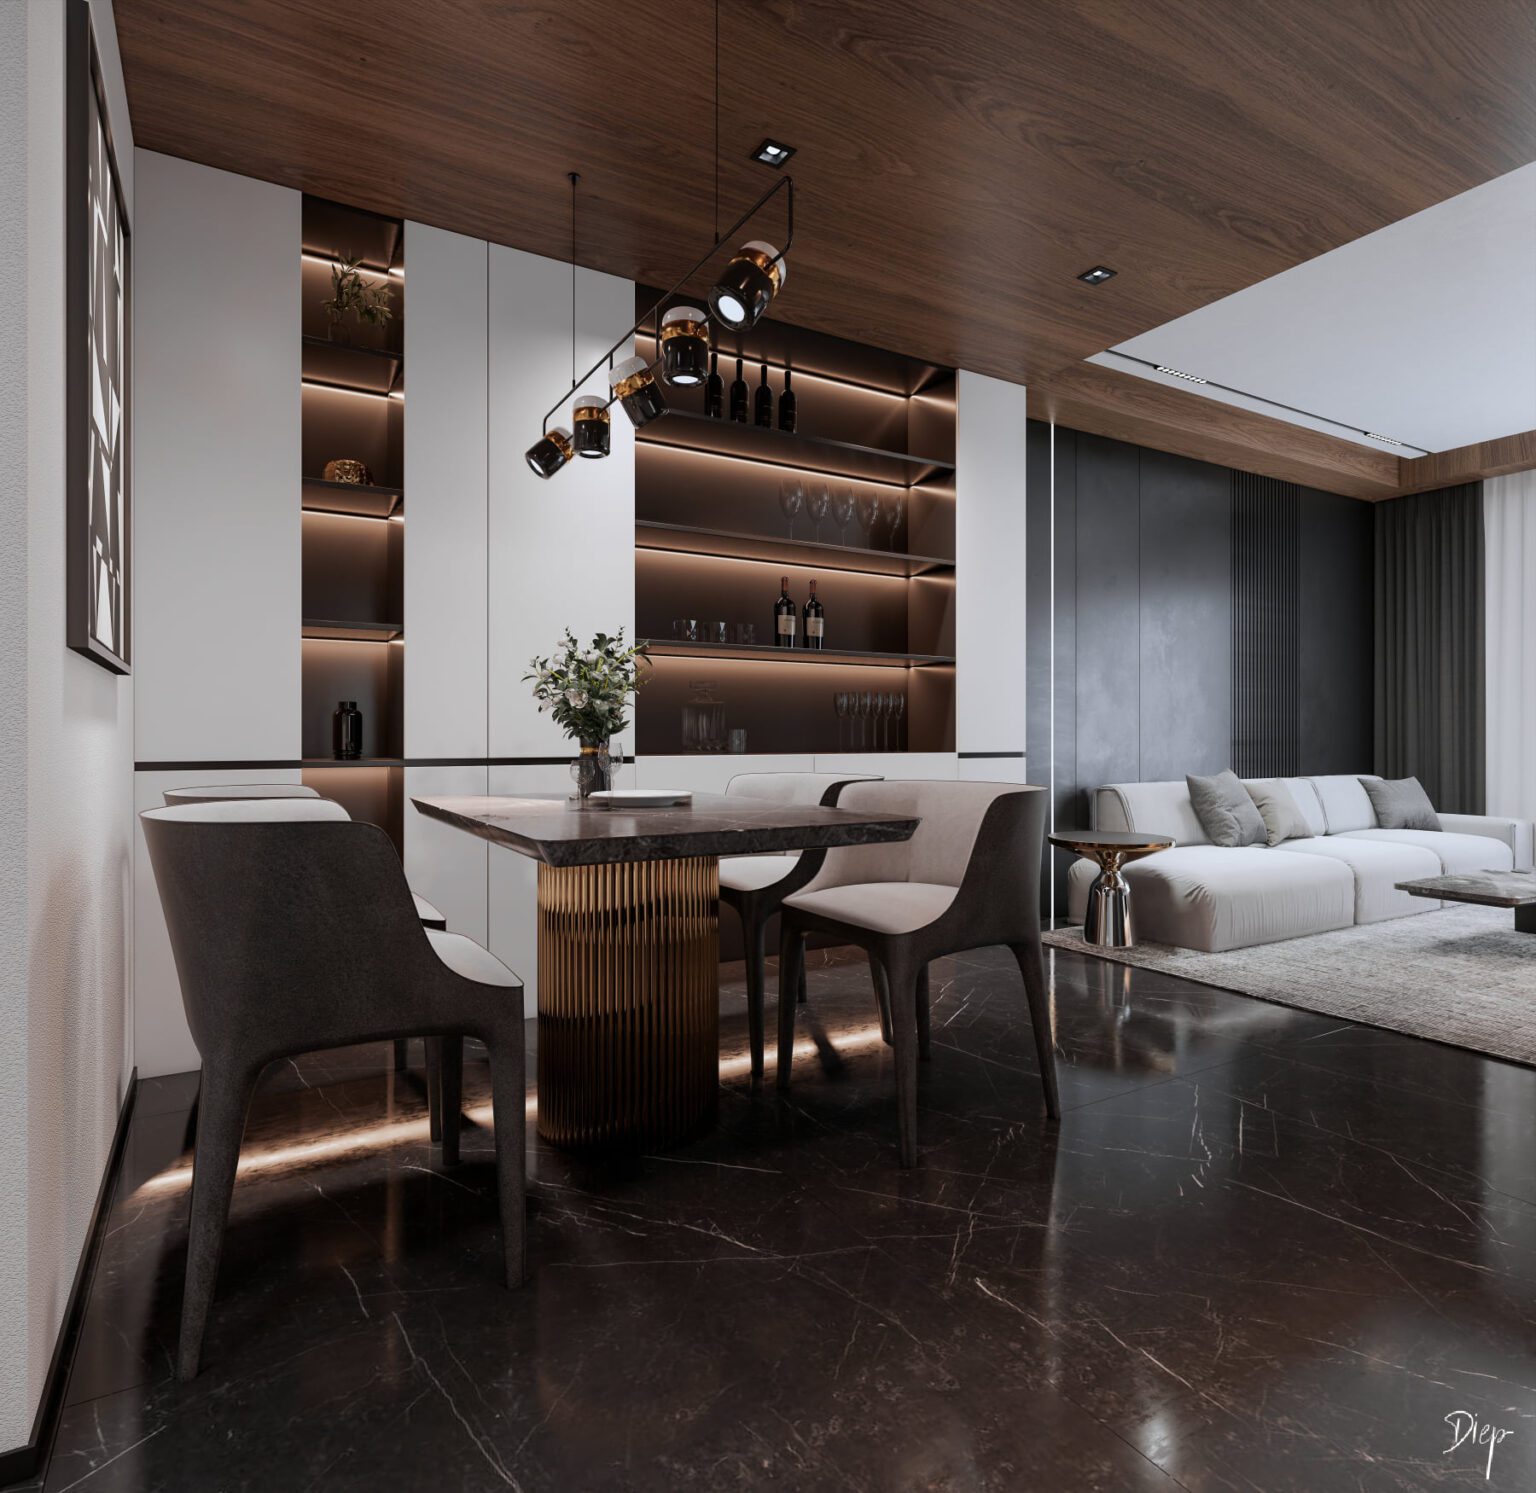 7030. Sketchup Apartment Interior Model Download by Nguyen Duy Diep